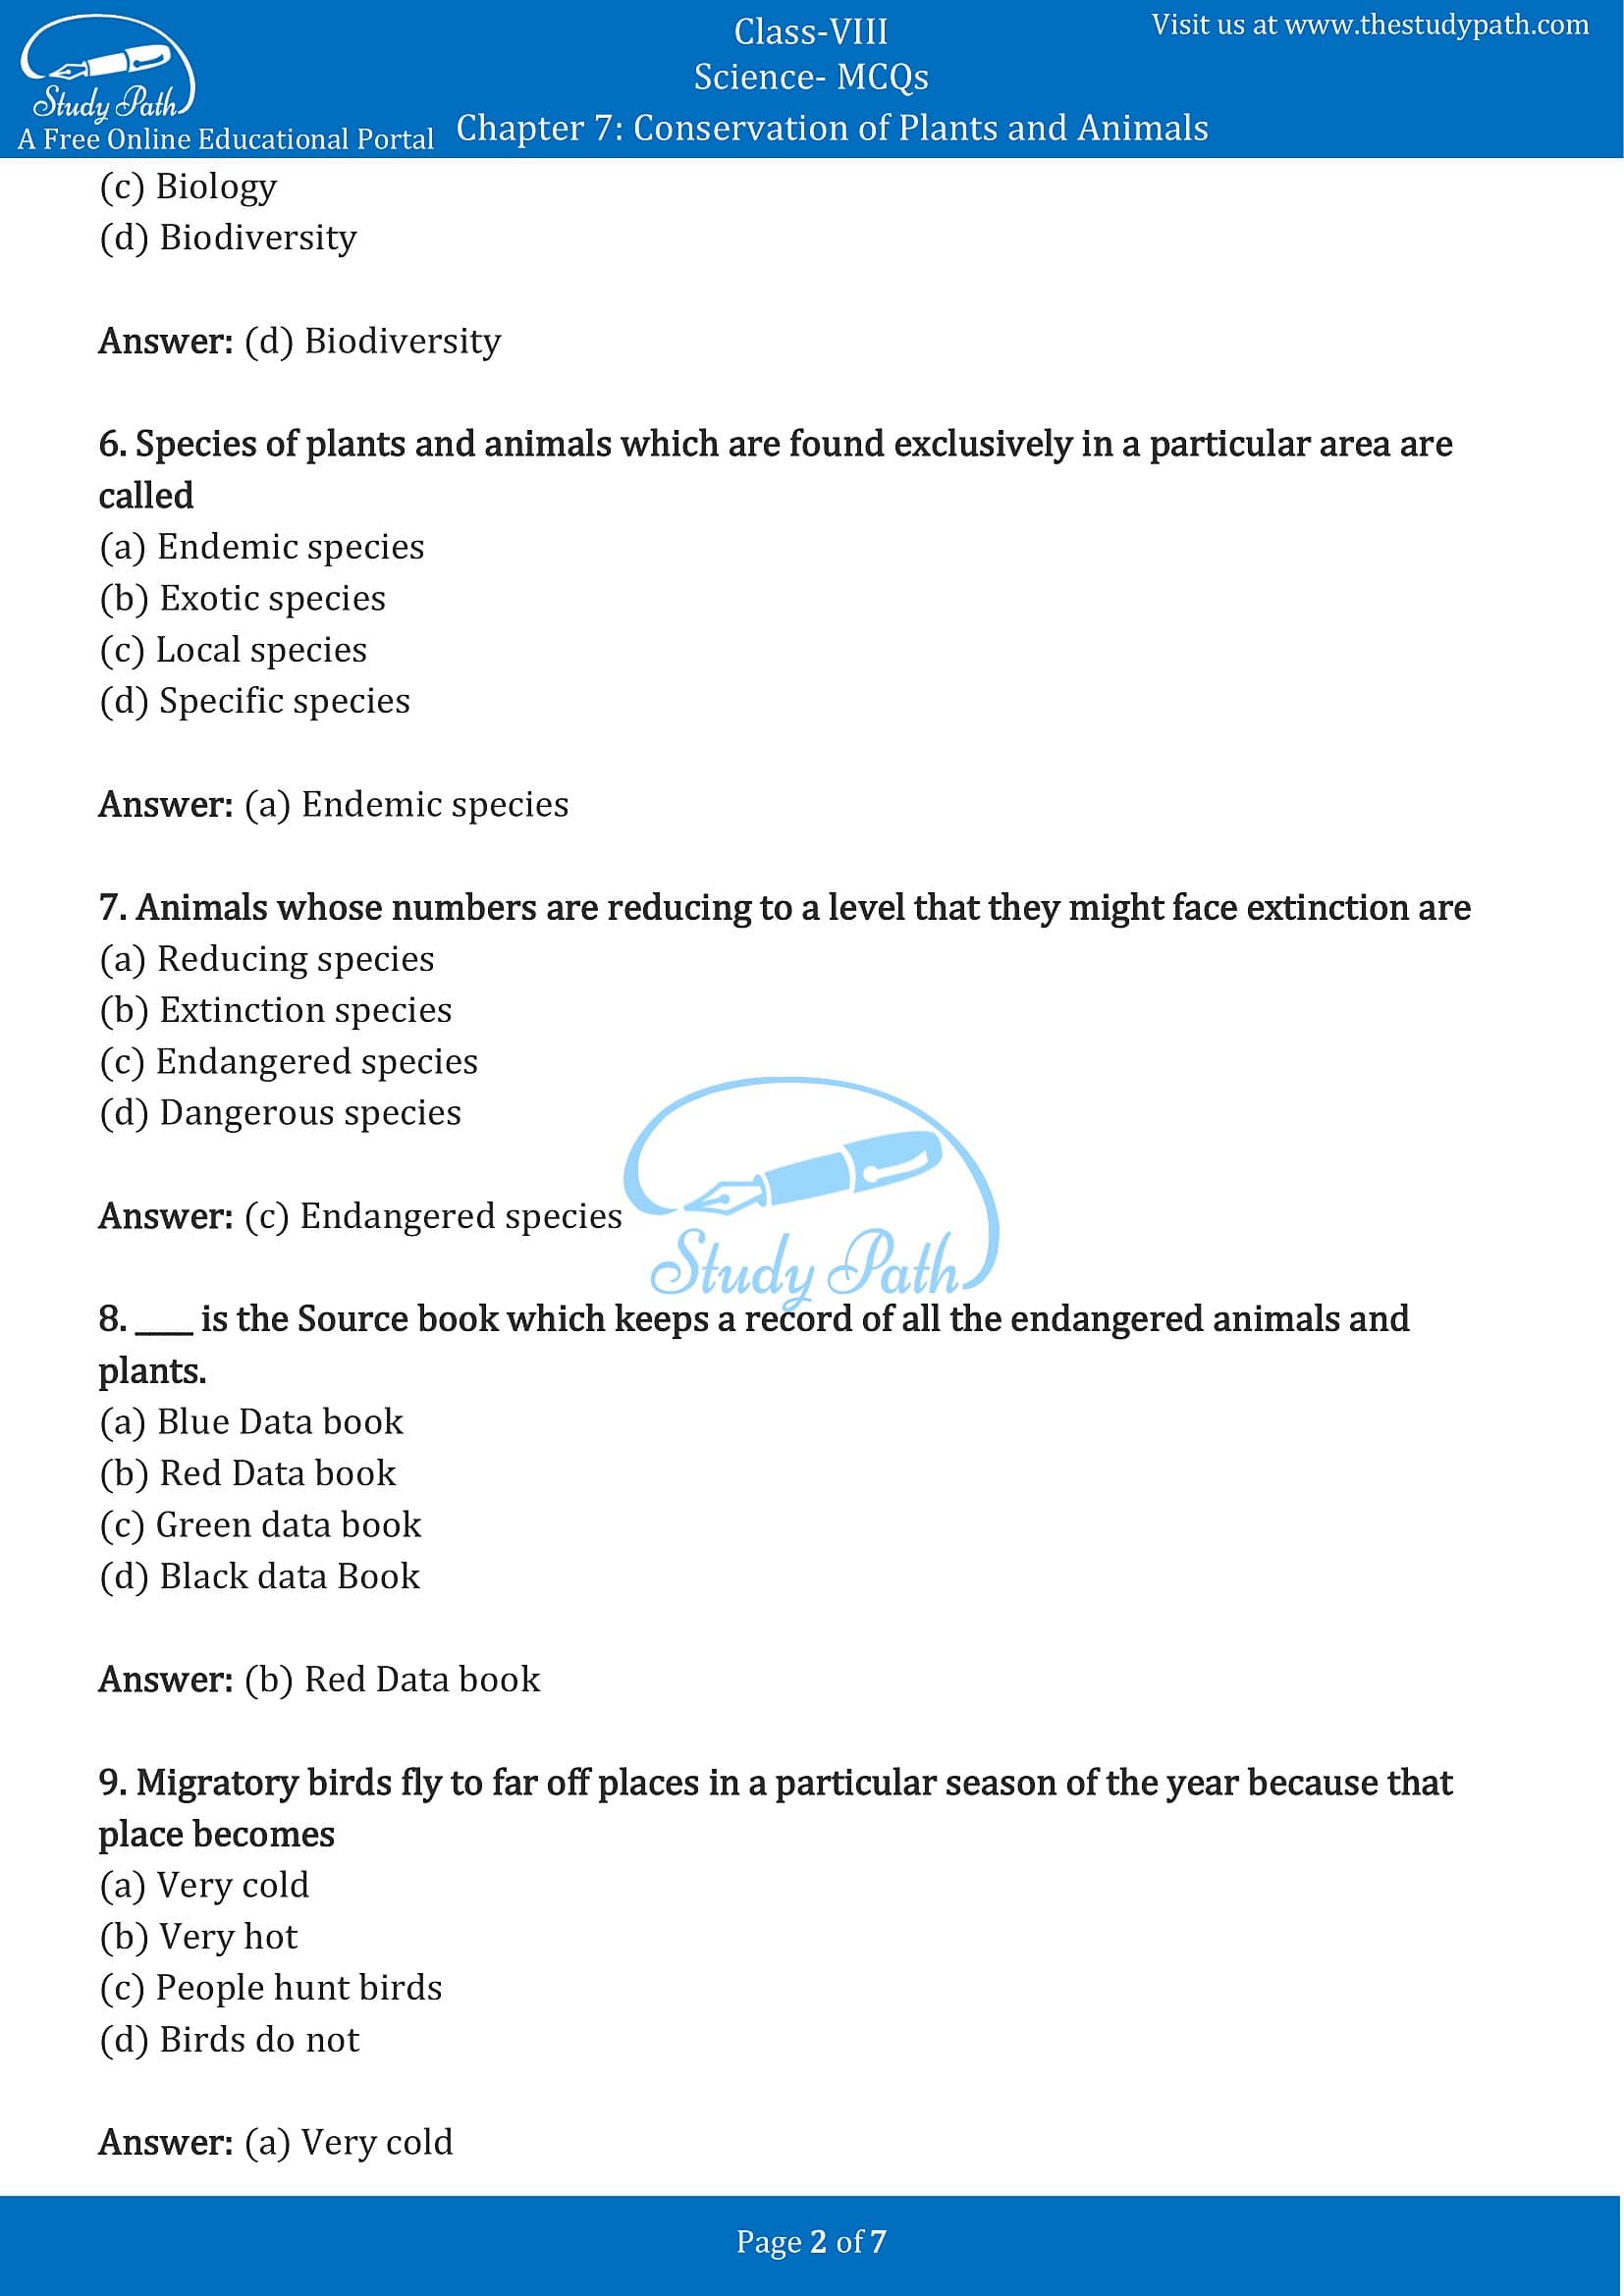 MCQ Questions for Class 8 Science Chapter 7 Conservation of Plants and Animals with Answers PDF -2